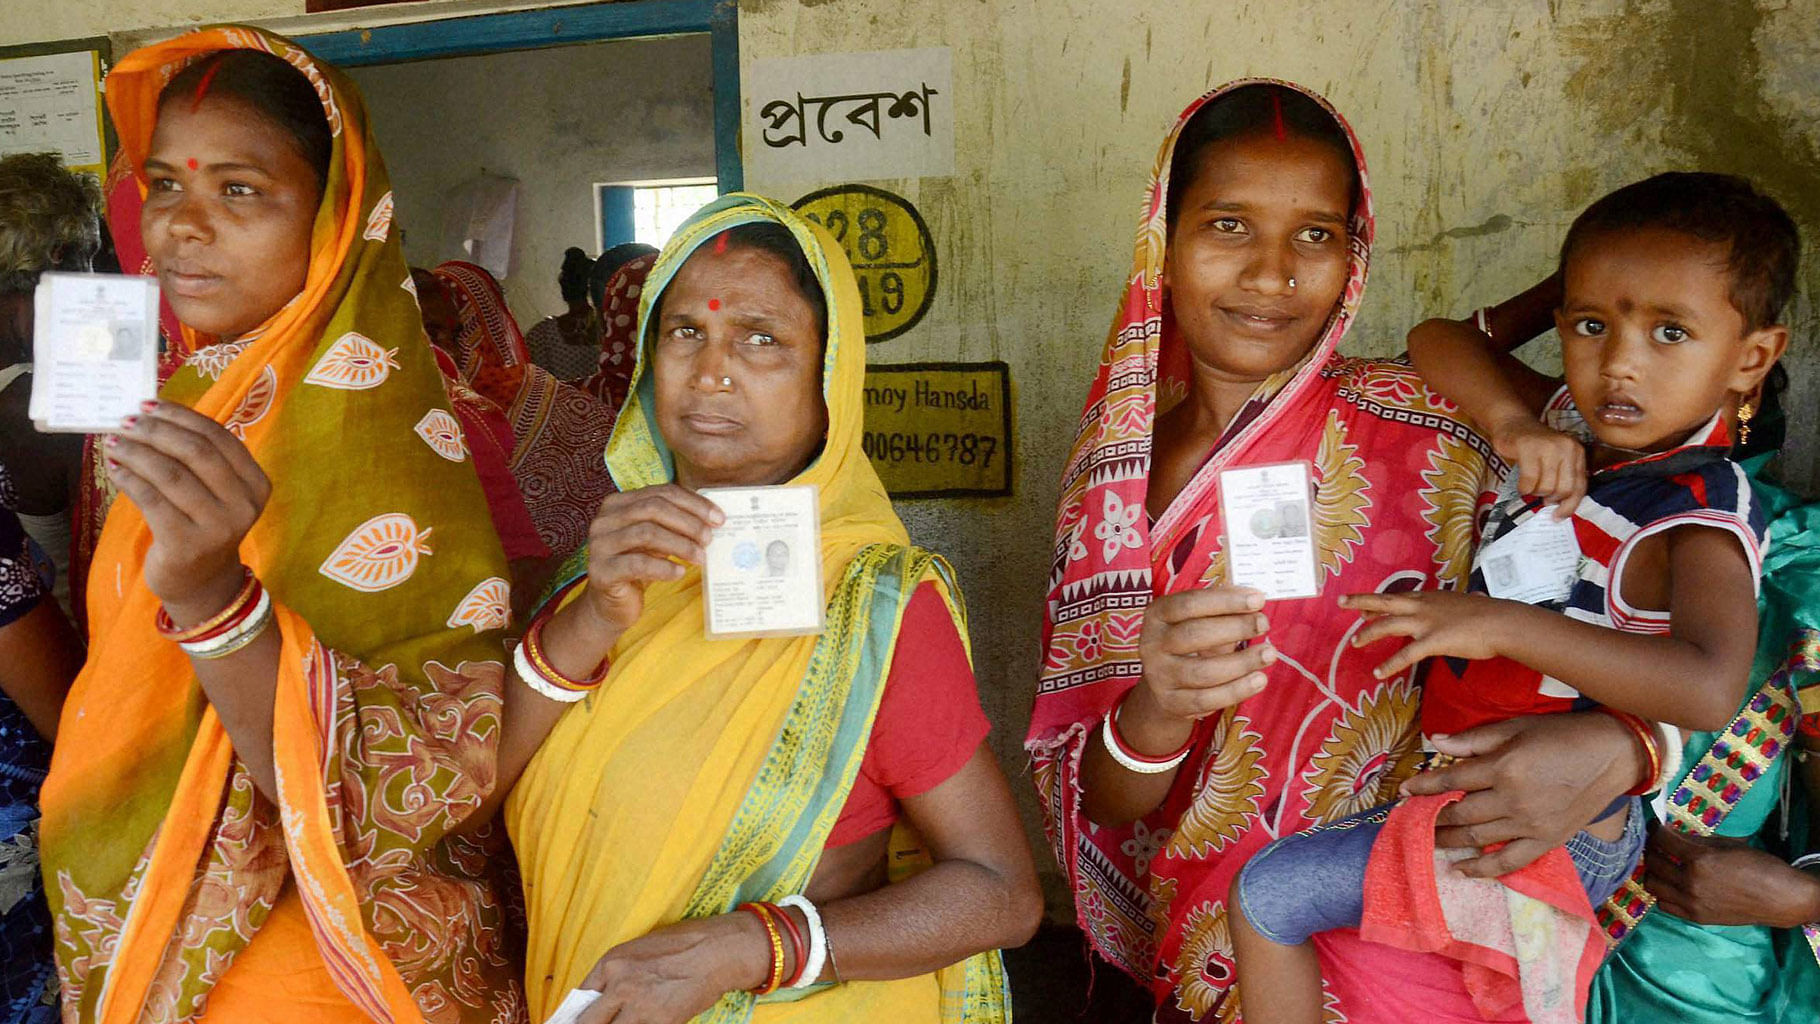 Women show  their voter cards before casting votes at a polling booth during the state assembly elections in Kharagpur. (Photo: PTI)